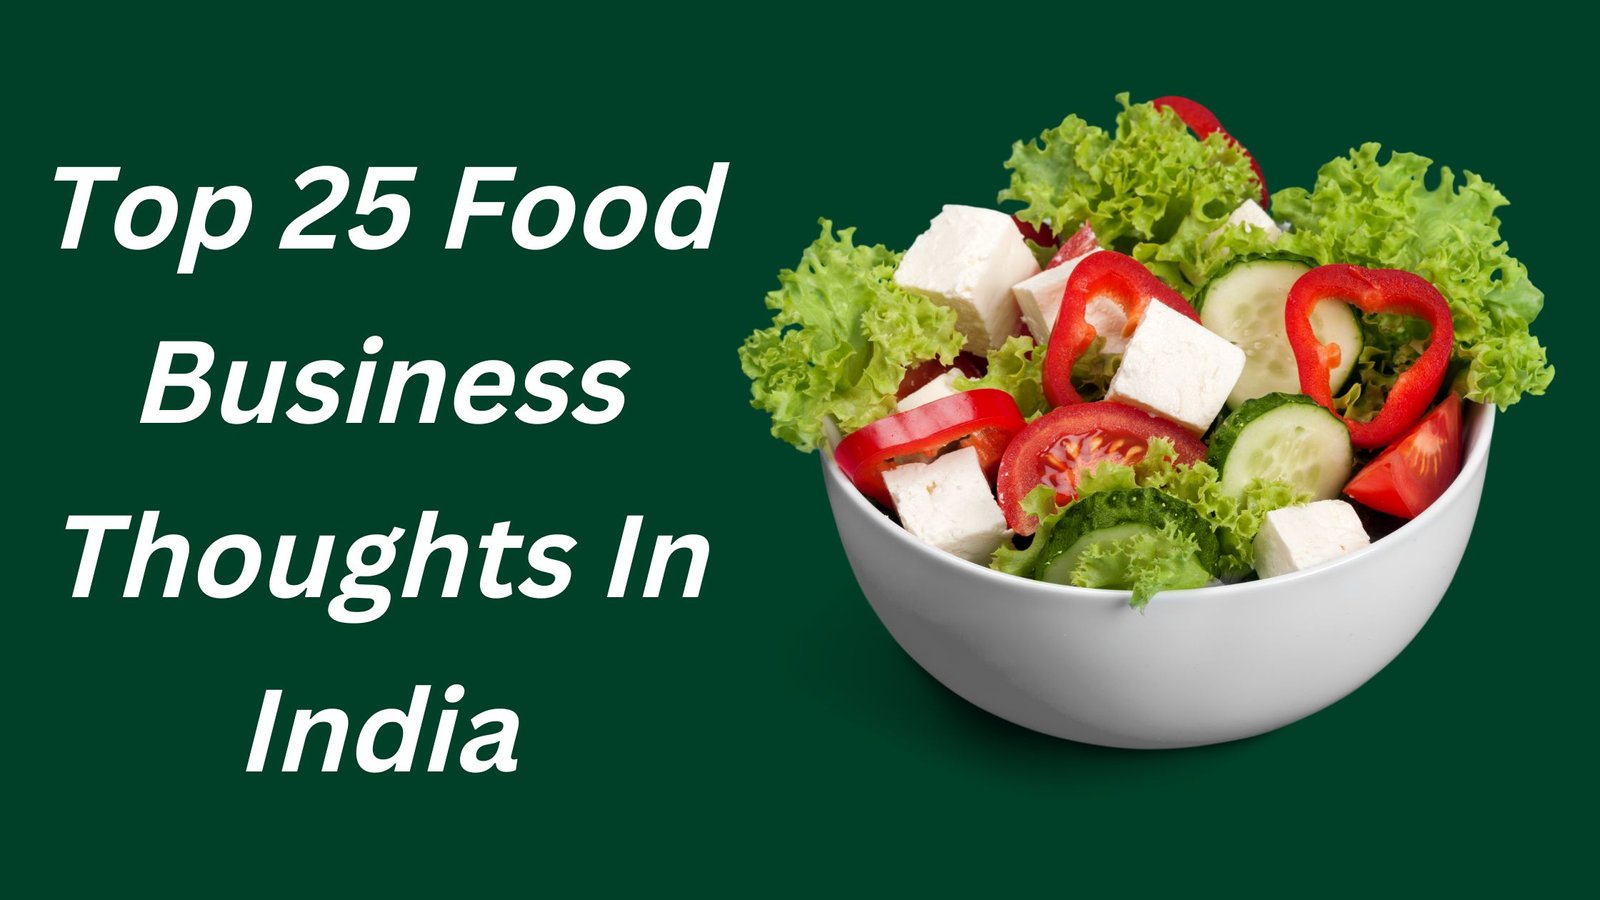 Top 25 Food Business Thoughts In India